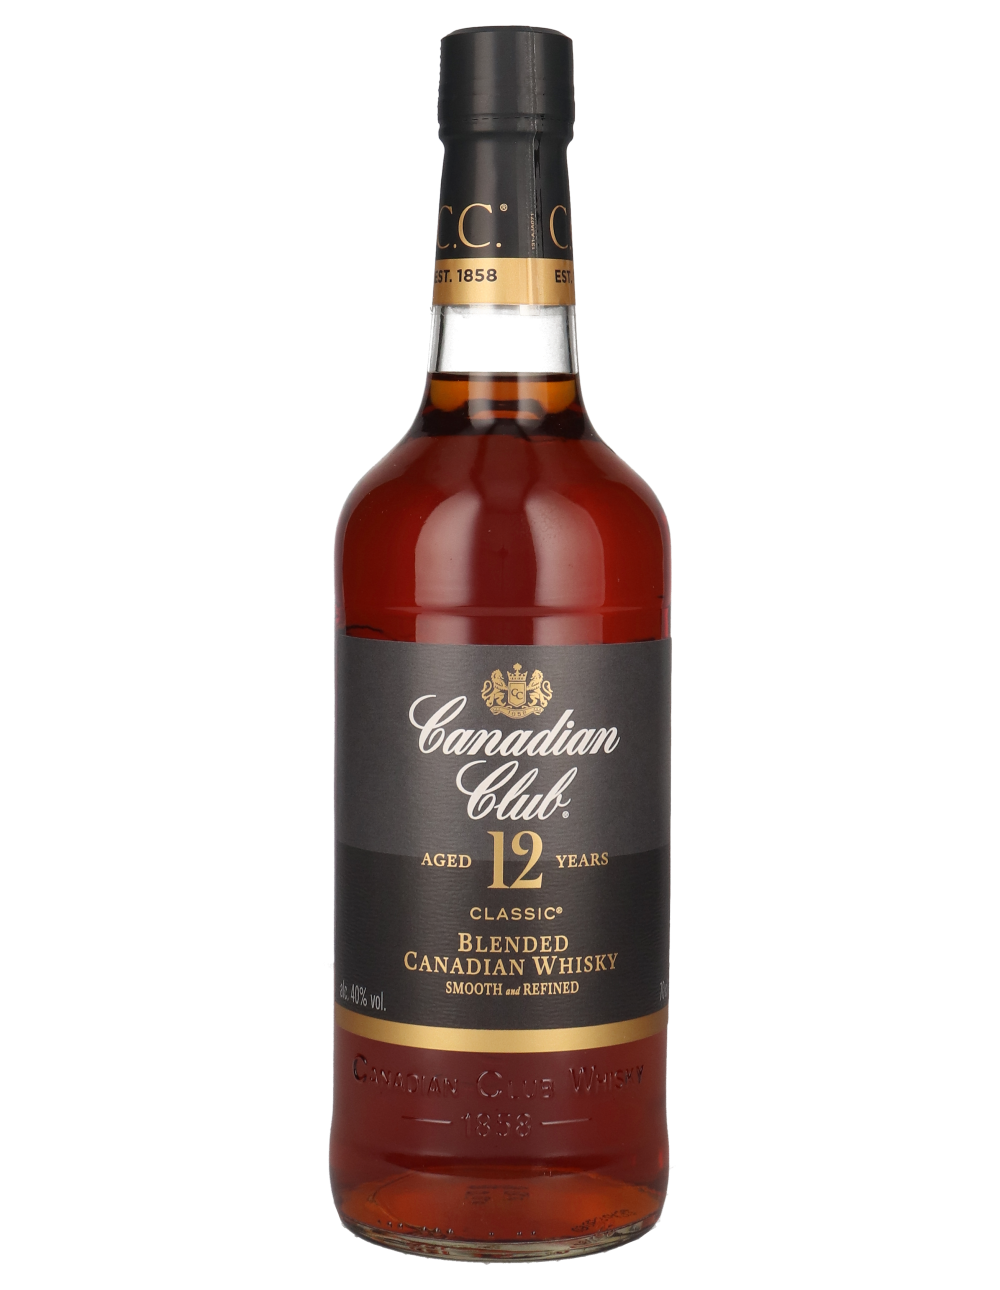 Canadian Club 12 years old